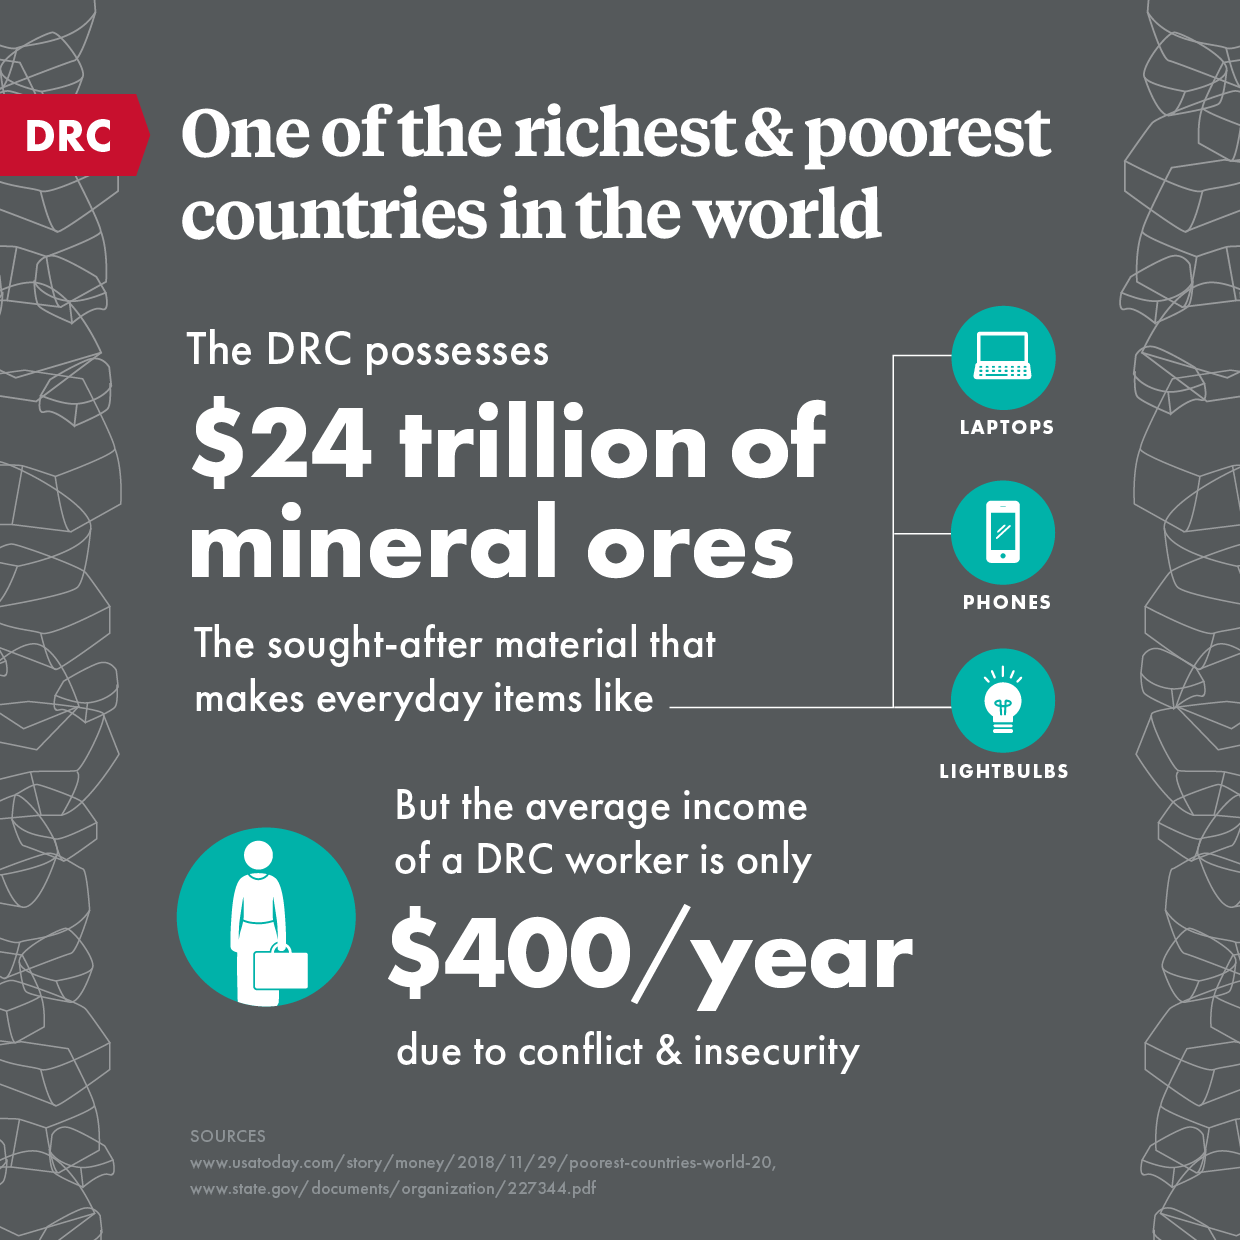 DRC possesses $24 trillion of mineral ores but the average income of a DRC worker is only $400/year